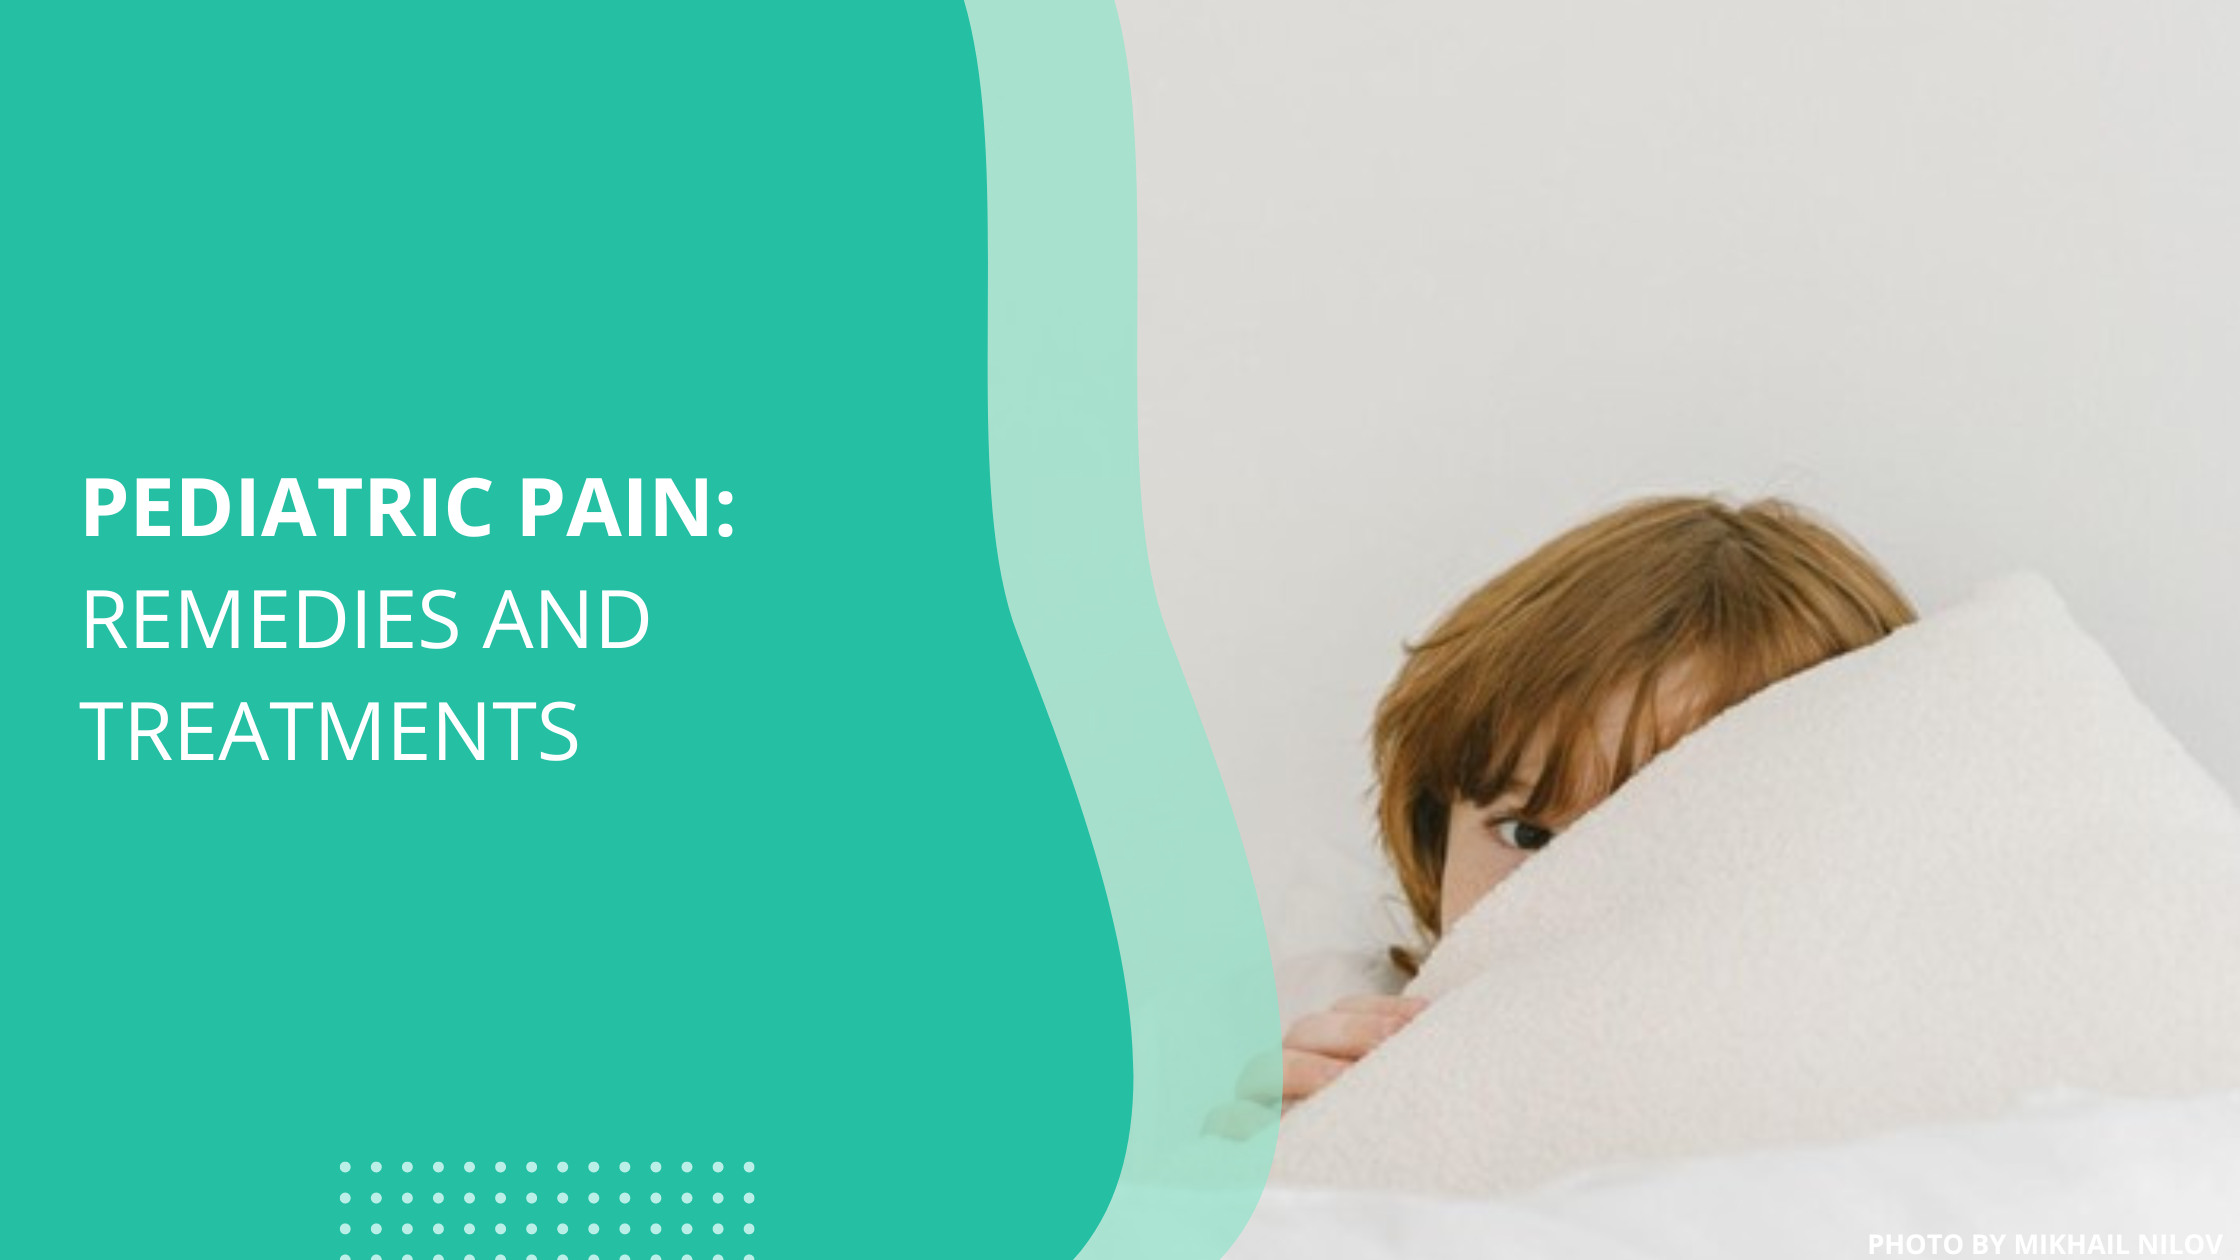 Pediatric Pain: Remedies and Treatments